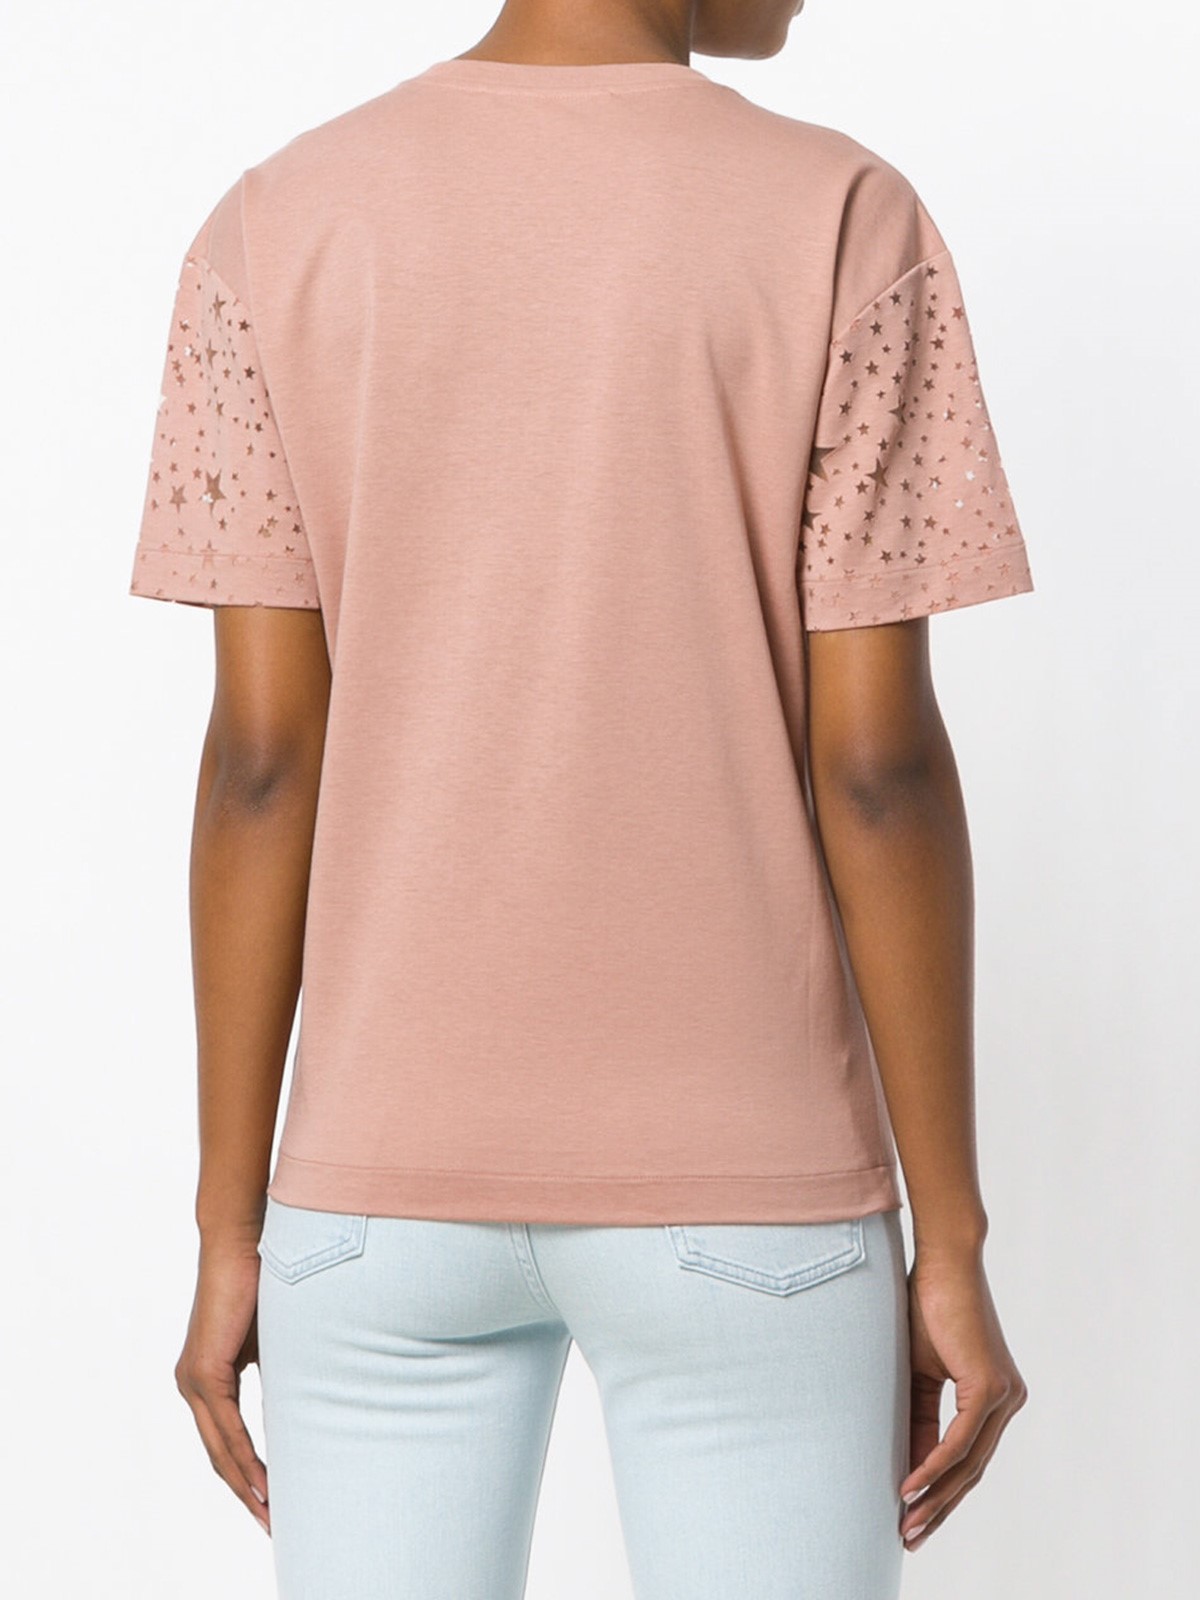 stella mccartney CUT-OUT STARS T-SHIRT available on montiboutique 